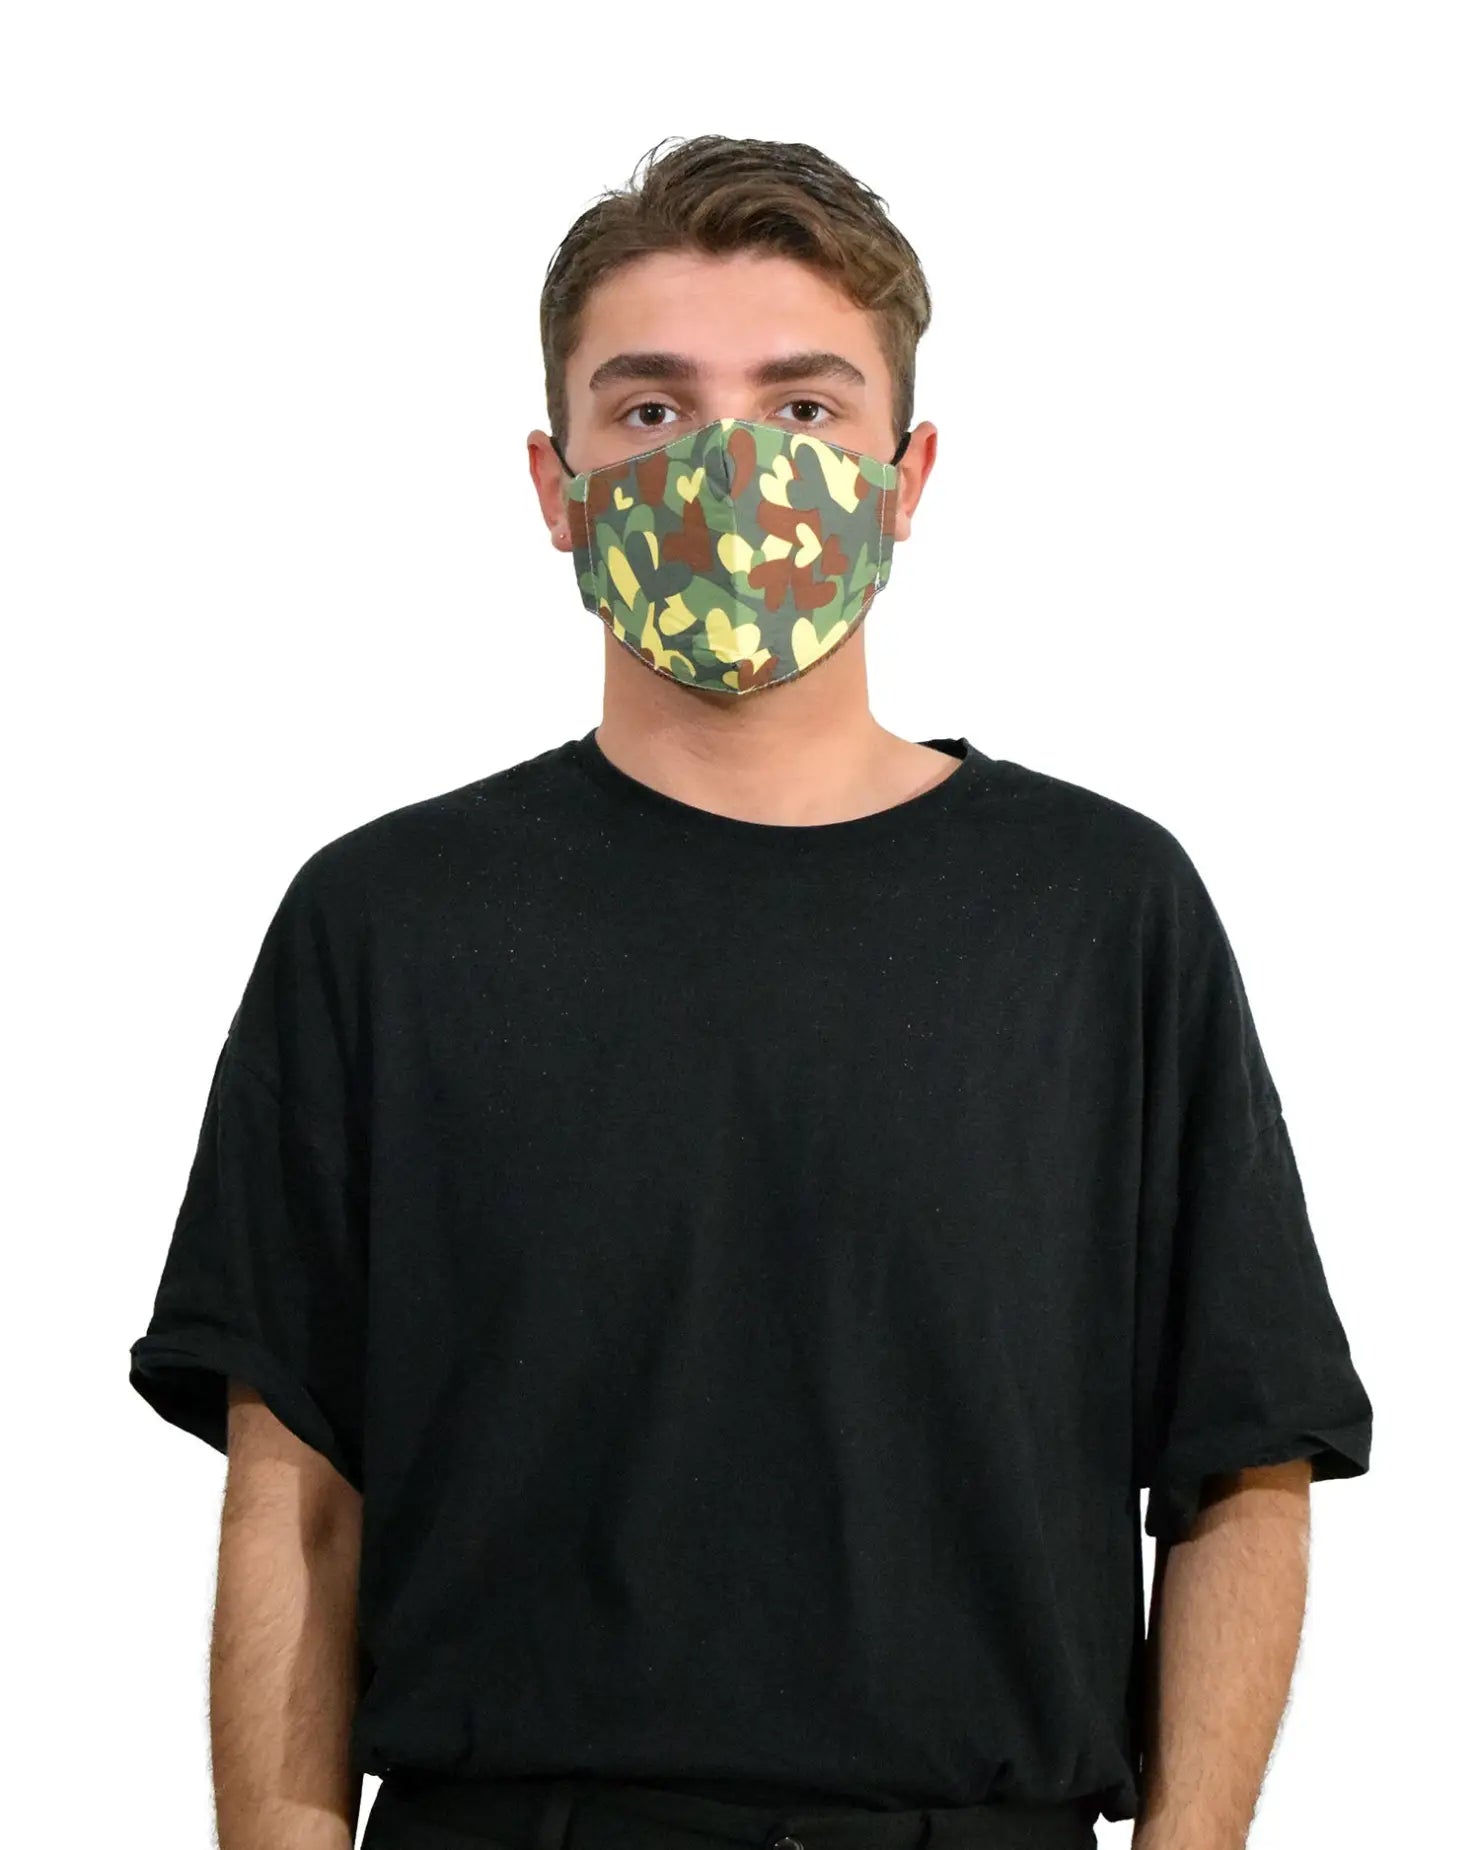 Cotton fashion face mask featuring a man in camouflage mask